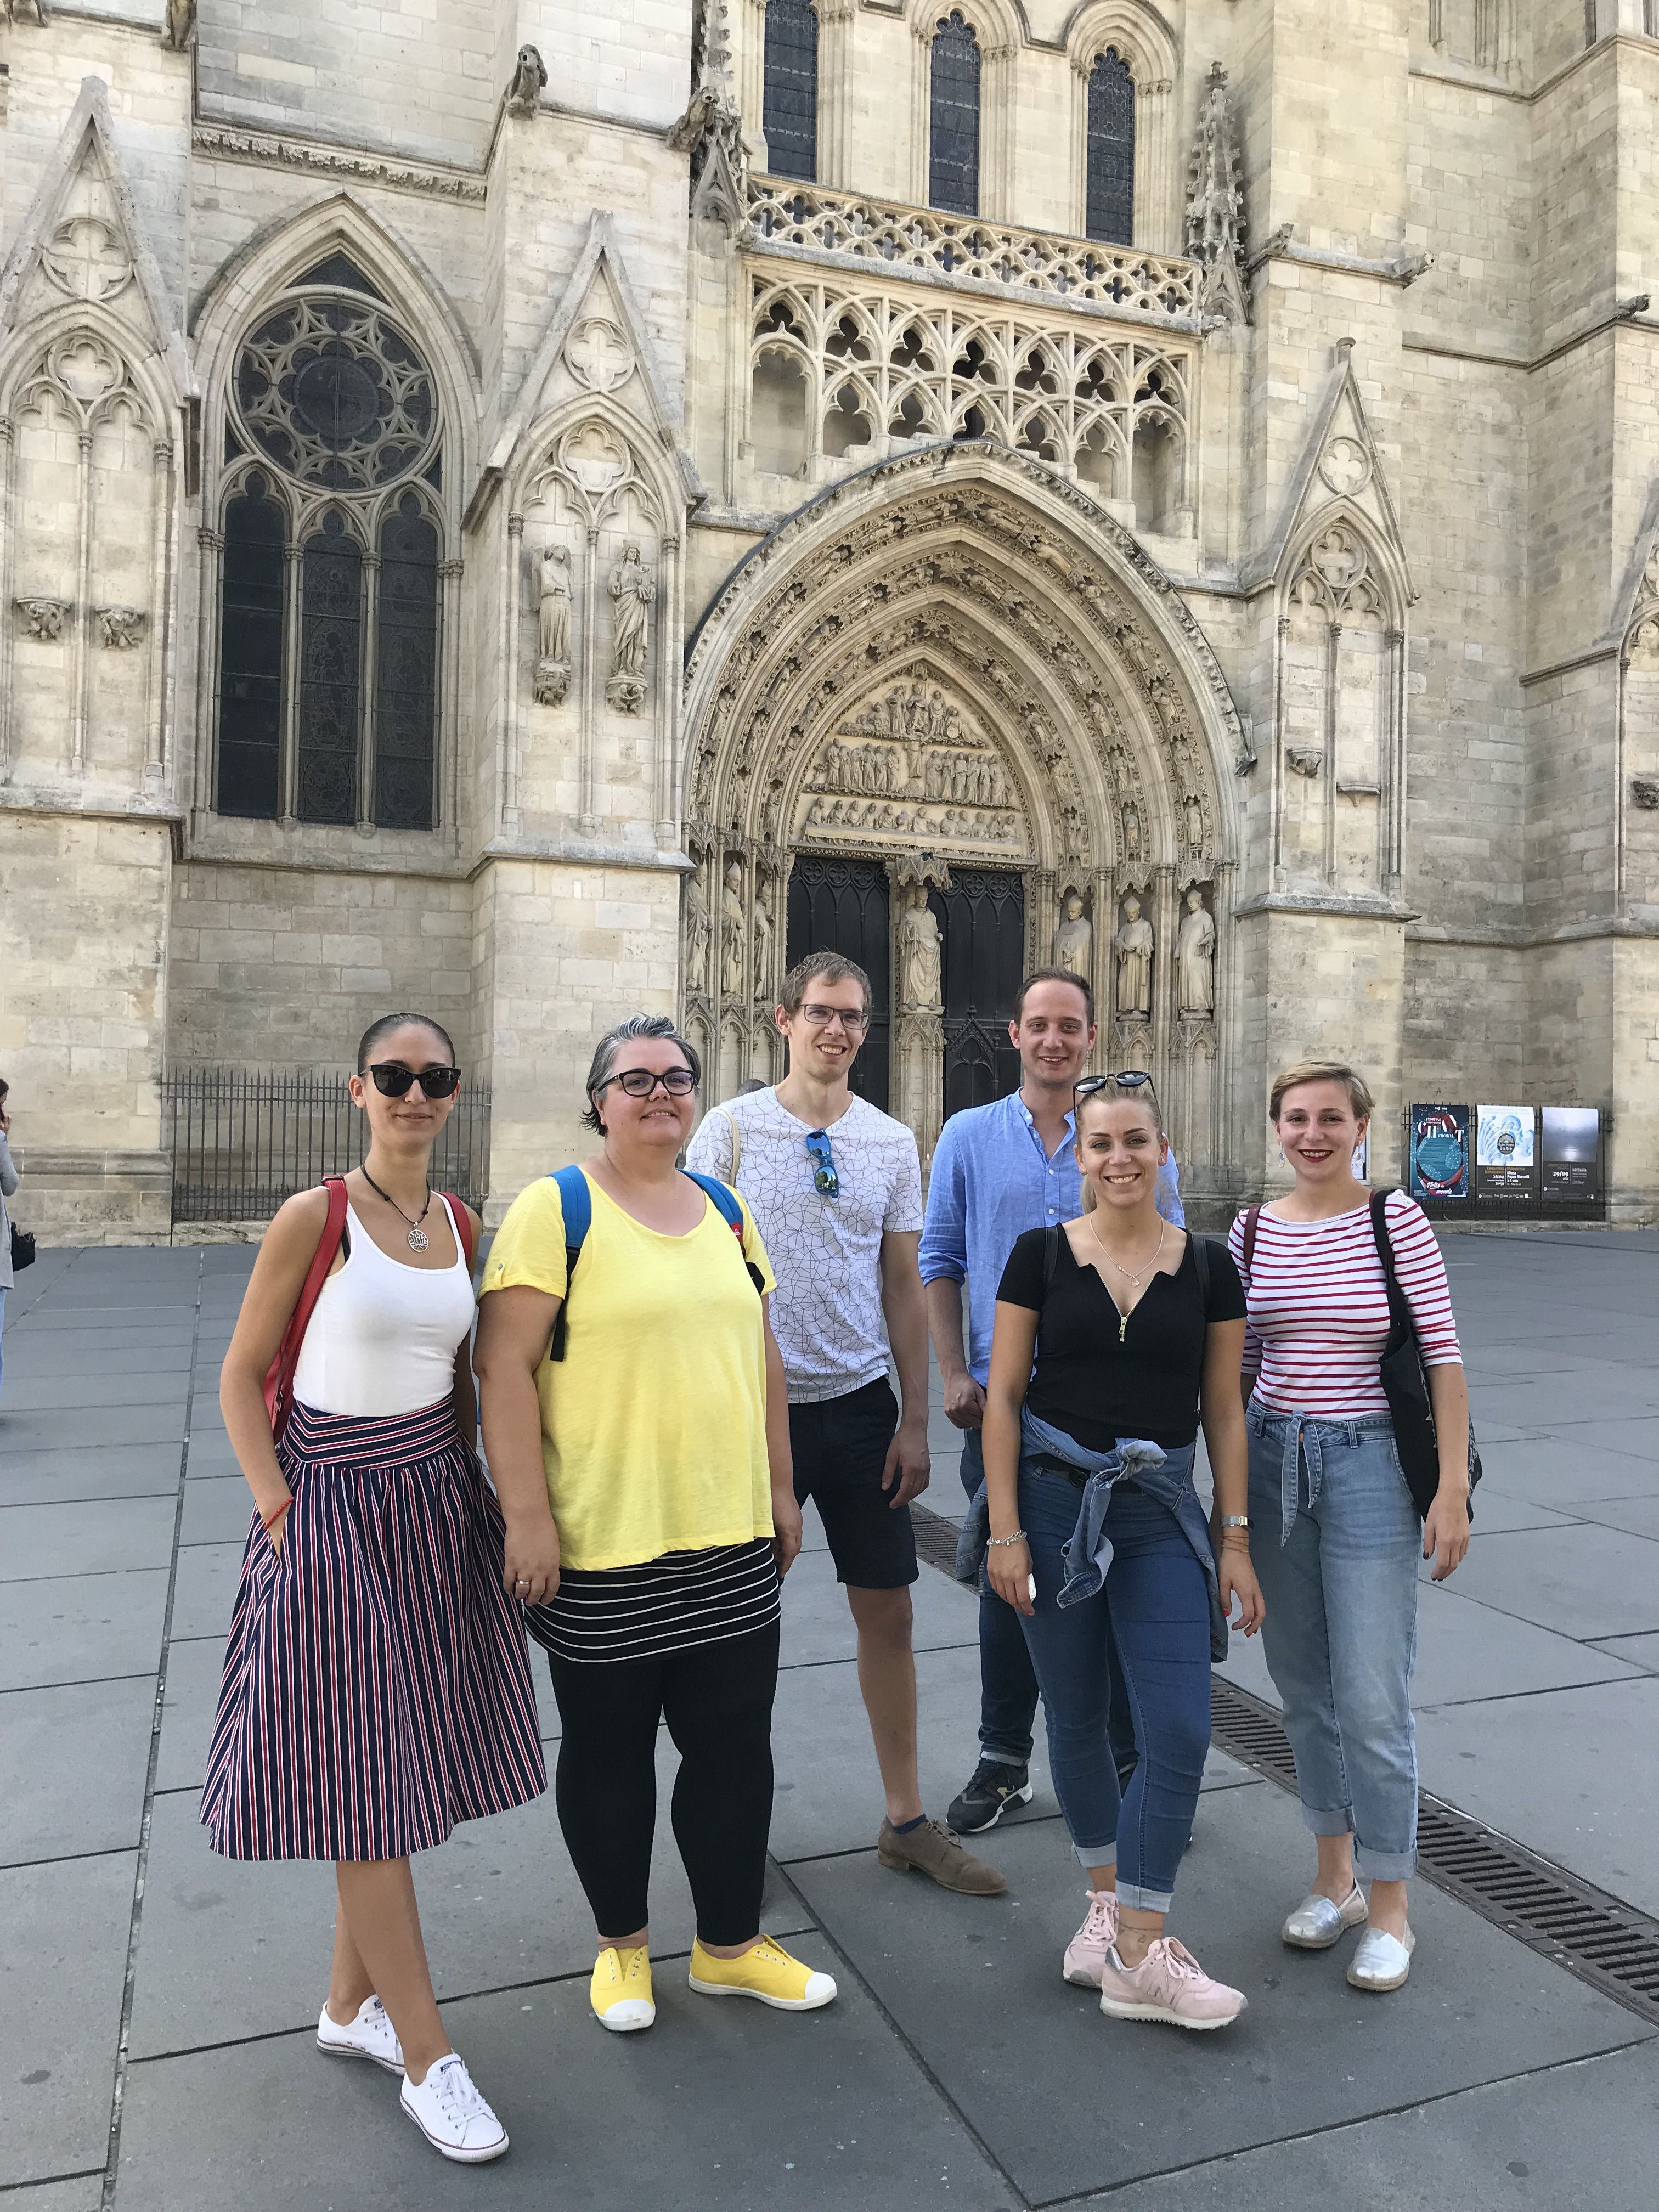 Participants in front of the Cathedral of Bordeaux